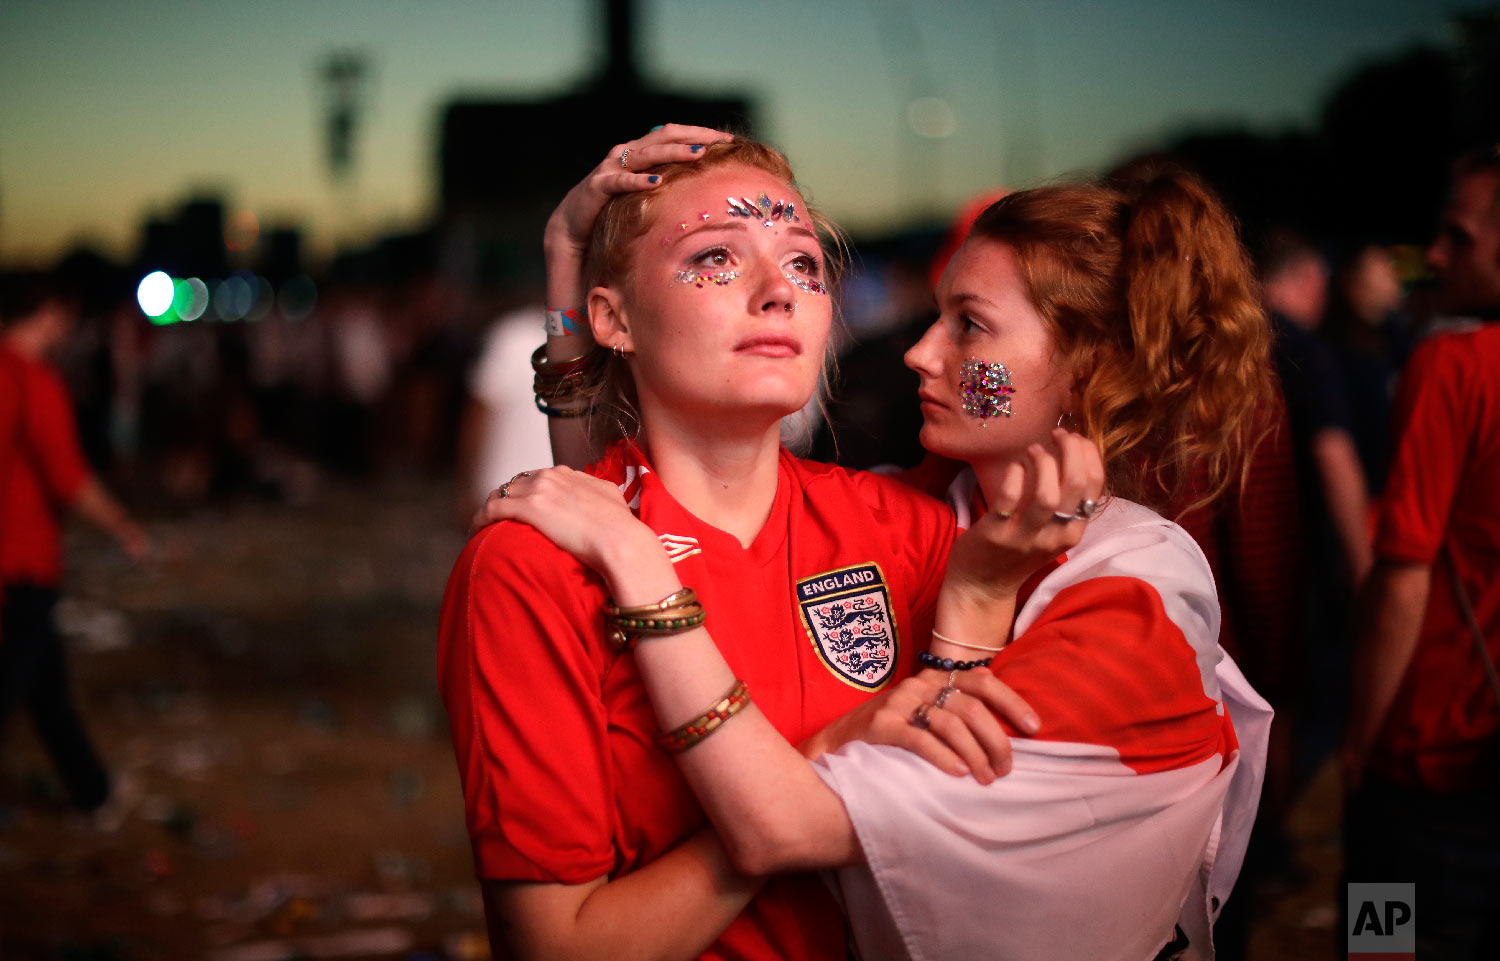  England soccer fans react after England national soccer team lost the semifinal match between Croatia and England at the 2018 soccer World Cup, in Hyde Park, London on July 11, 2018. (AP Photo/Matt Dunham) 